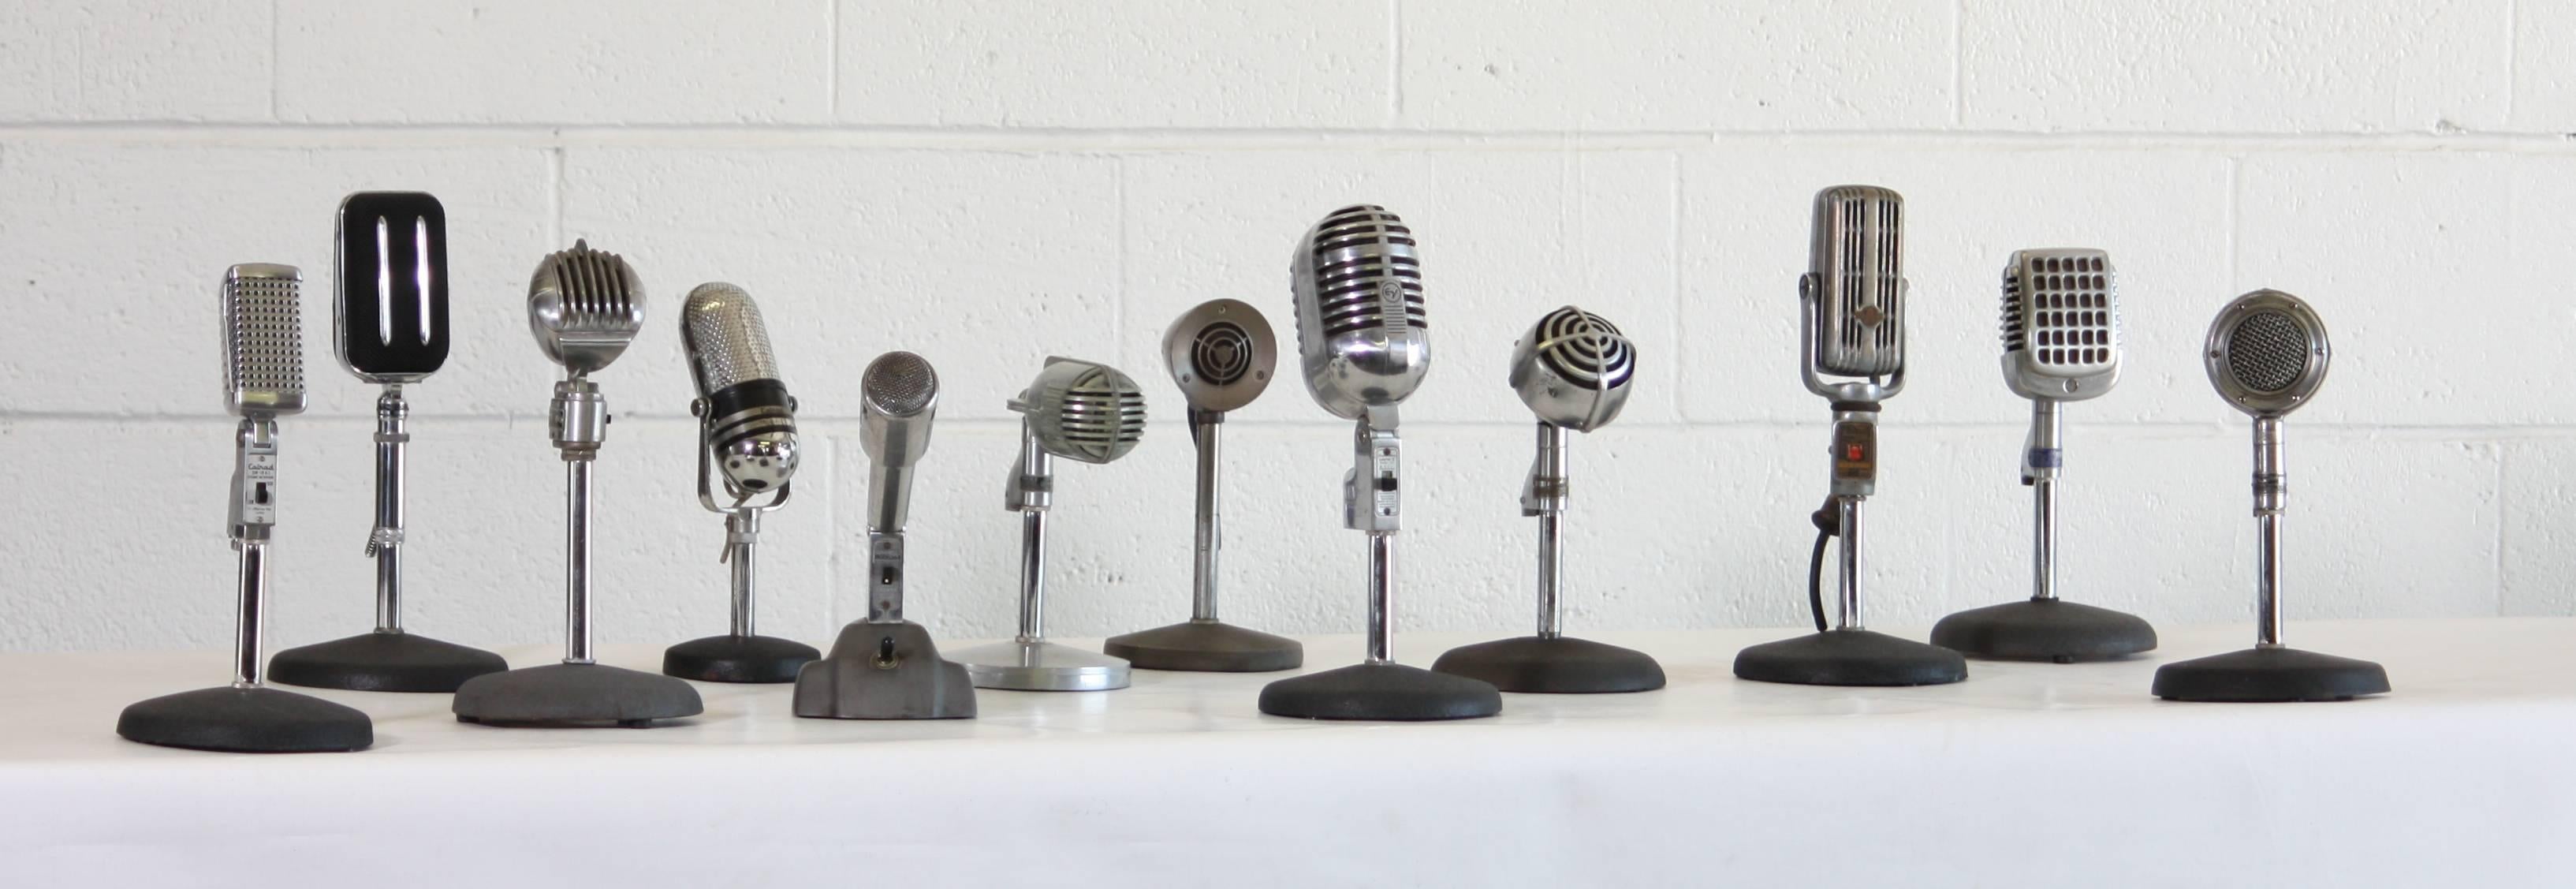 Amazing collection of 12 different Mid-Century radio microphones. From the curated collection Space 20th Century Modern.

Calrad
Amperite
Electrovoice
Turner crystal
Shure 
Astatic
Monoplex.
   